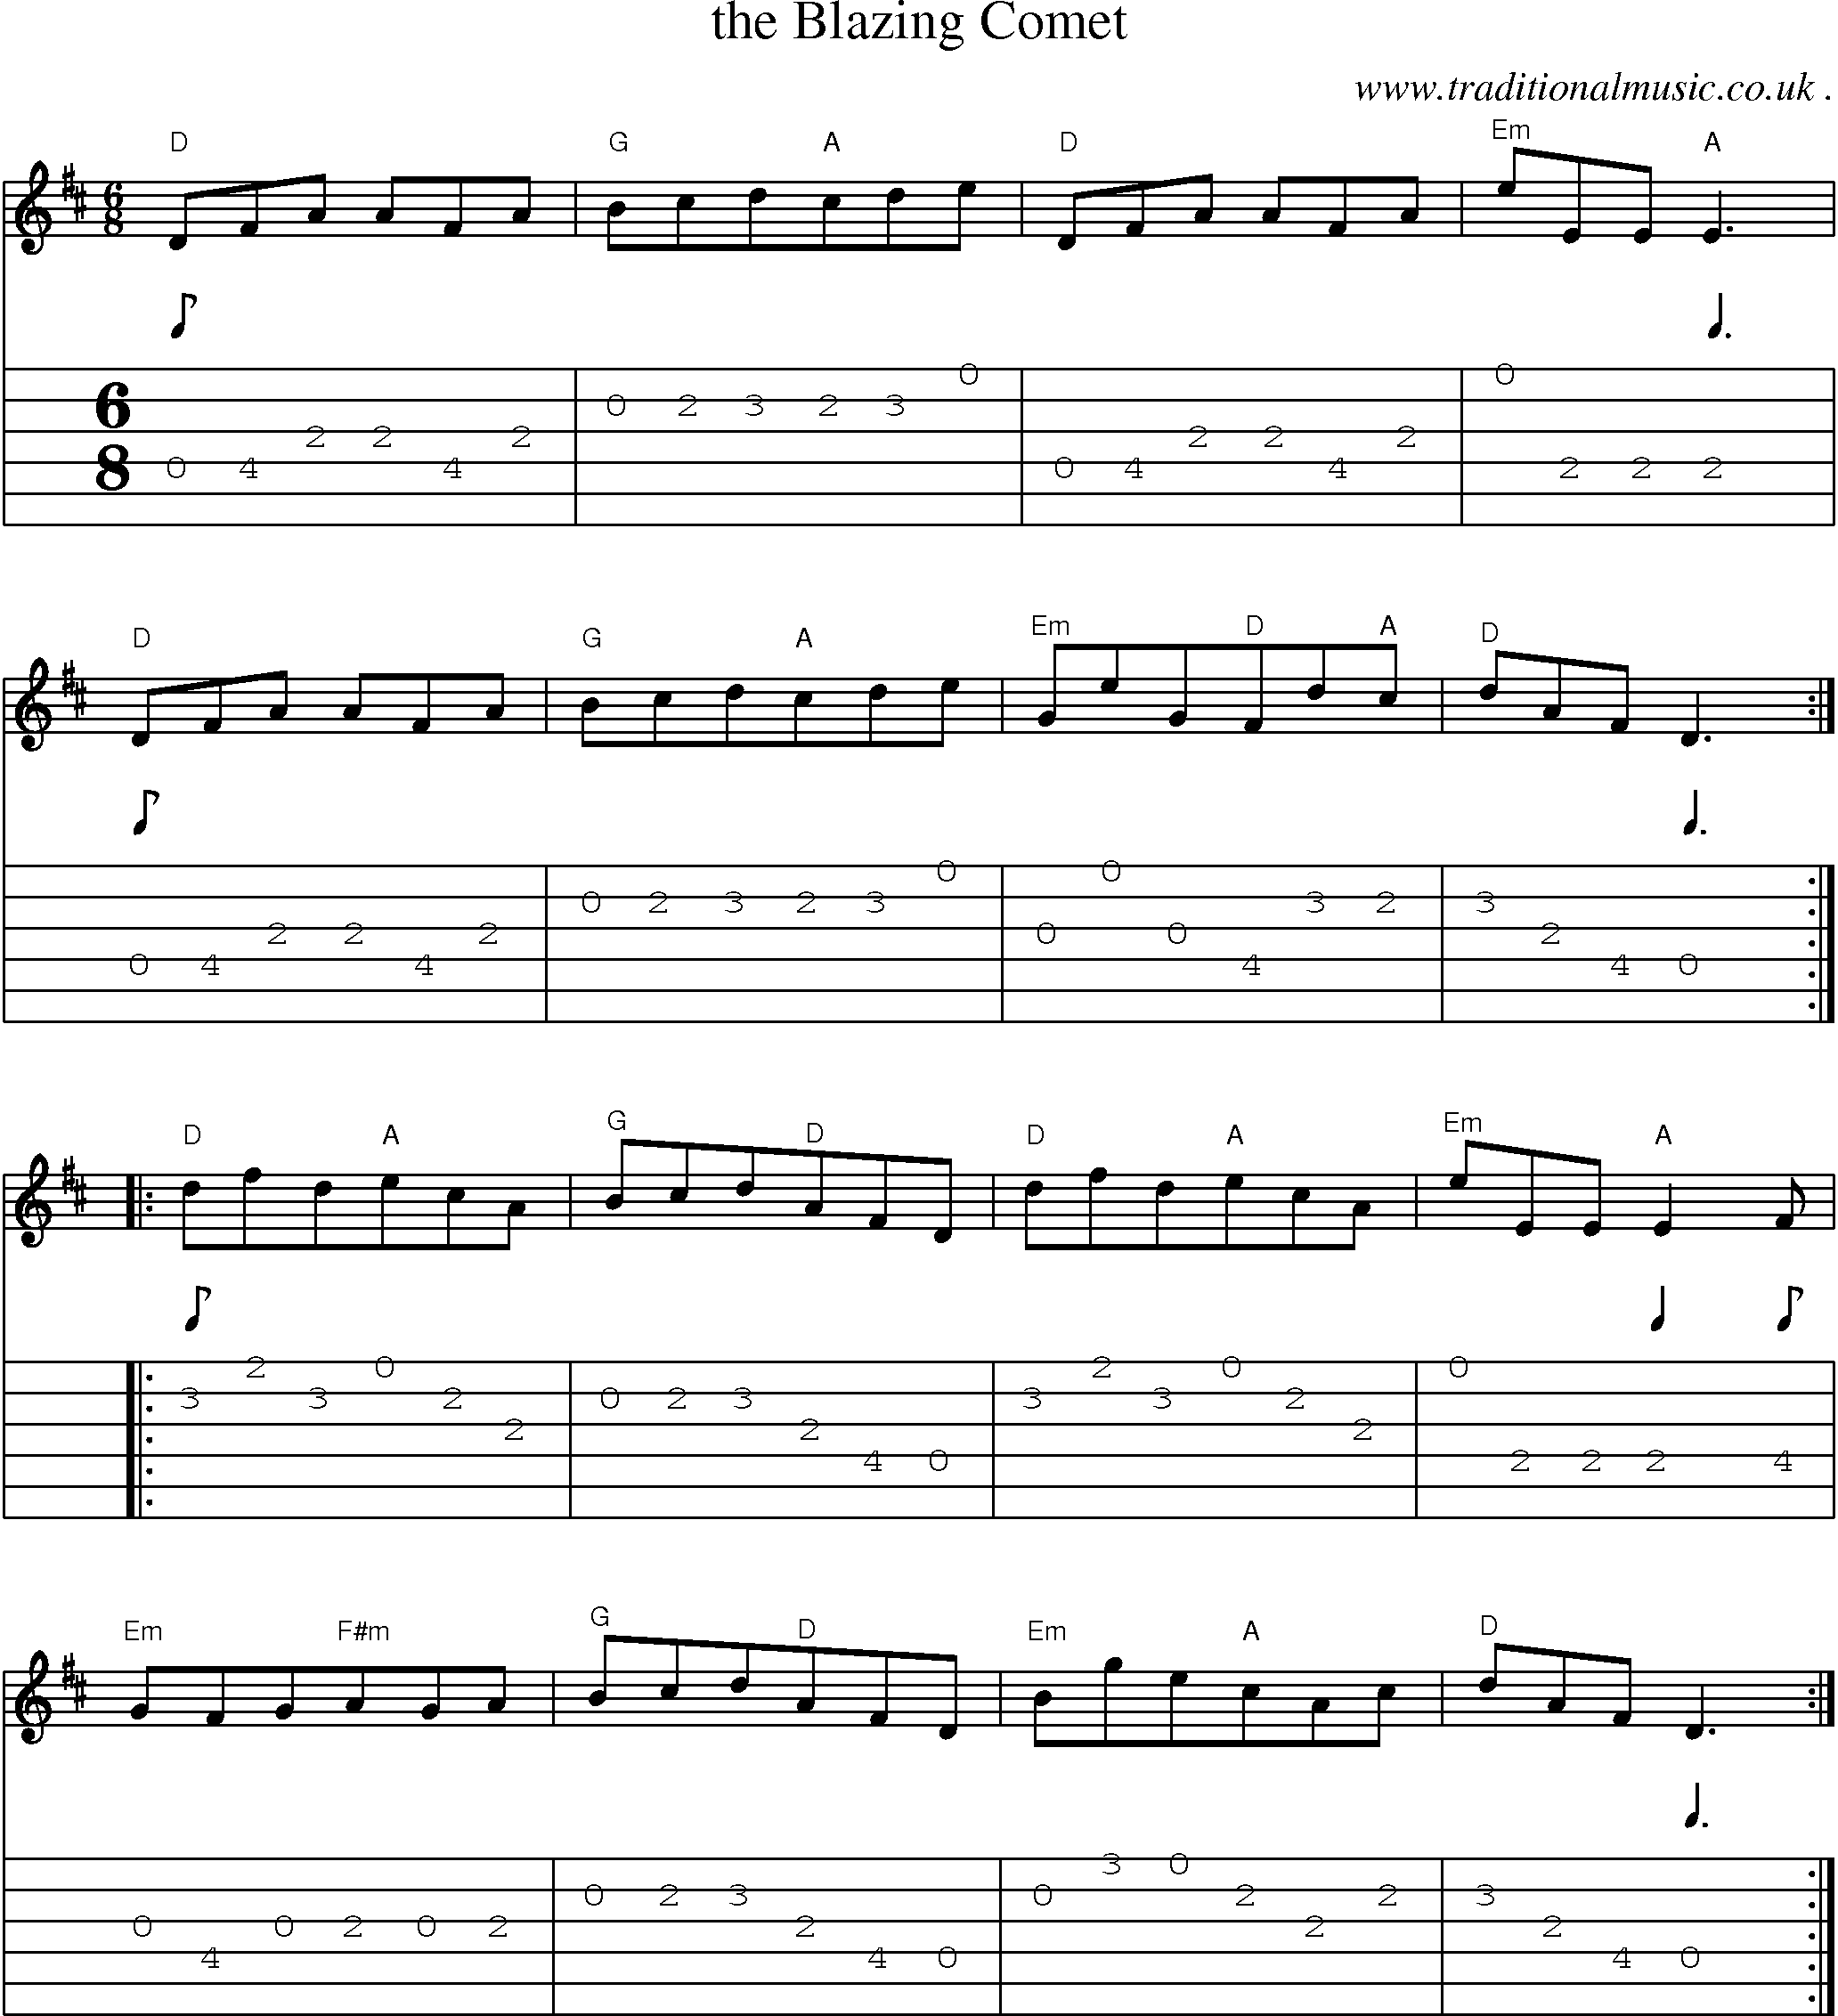 Sheet-Music and Guitar Tabs for The Blazing Comet